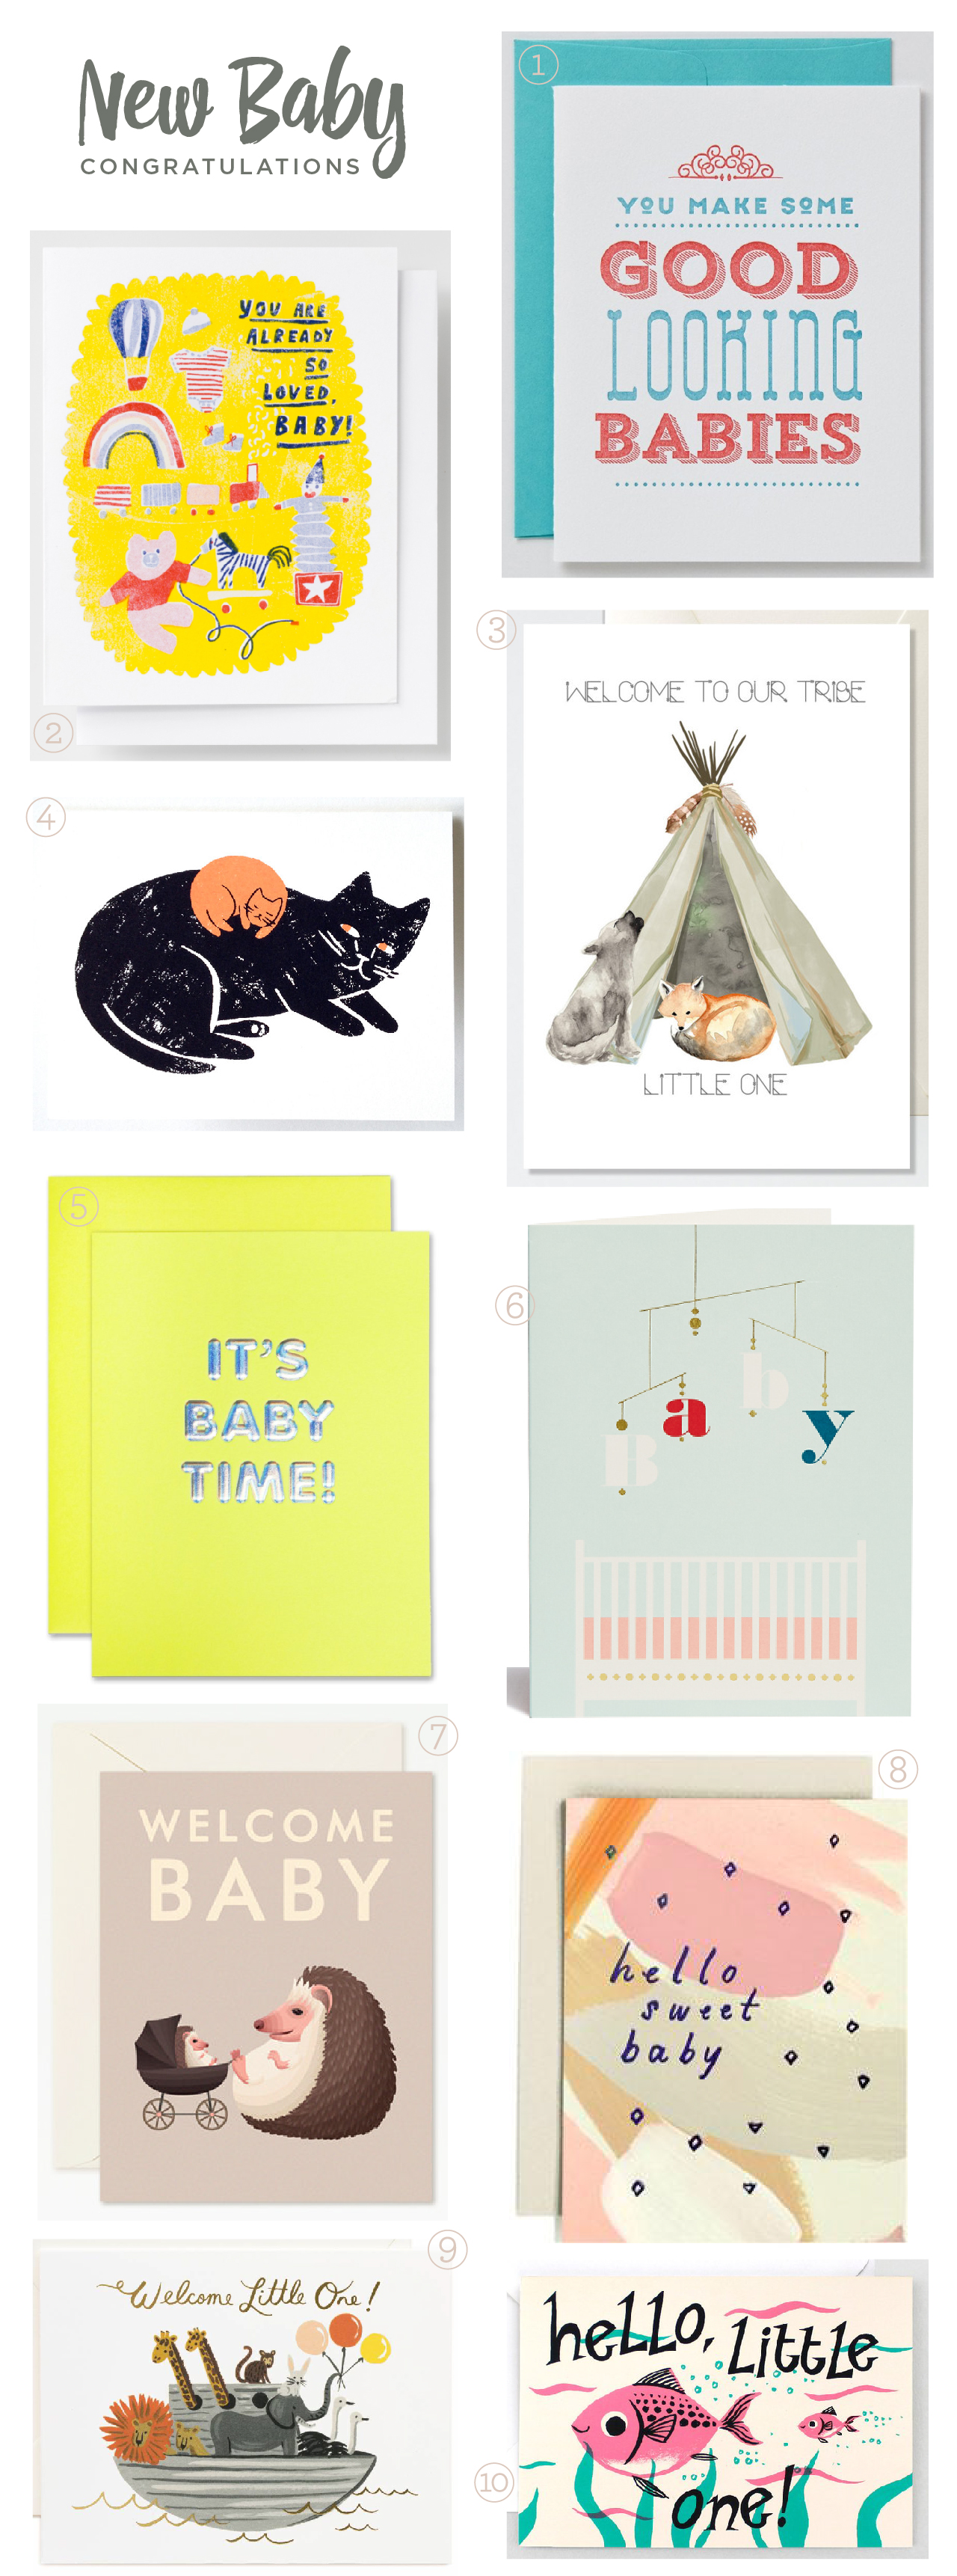 New Baby Congratulations Cards